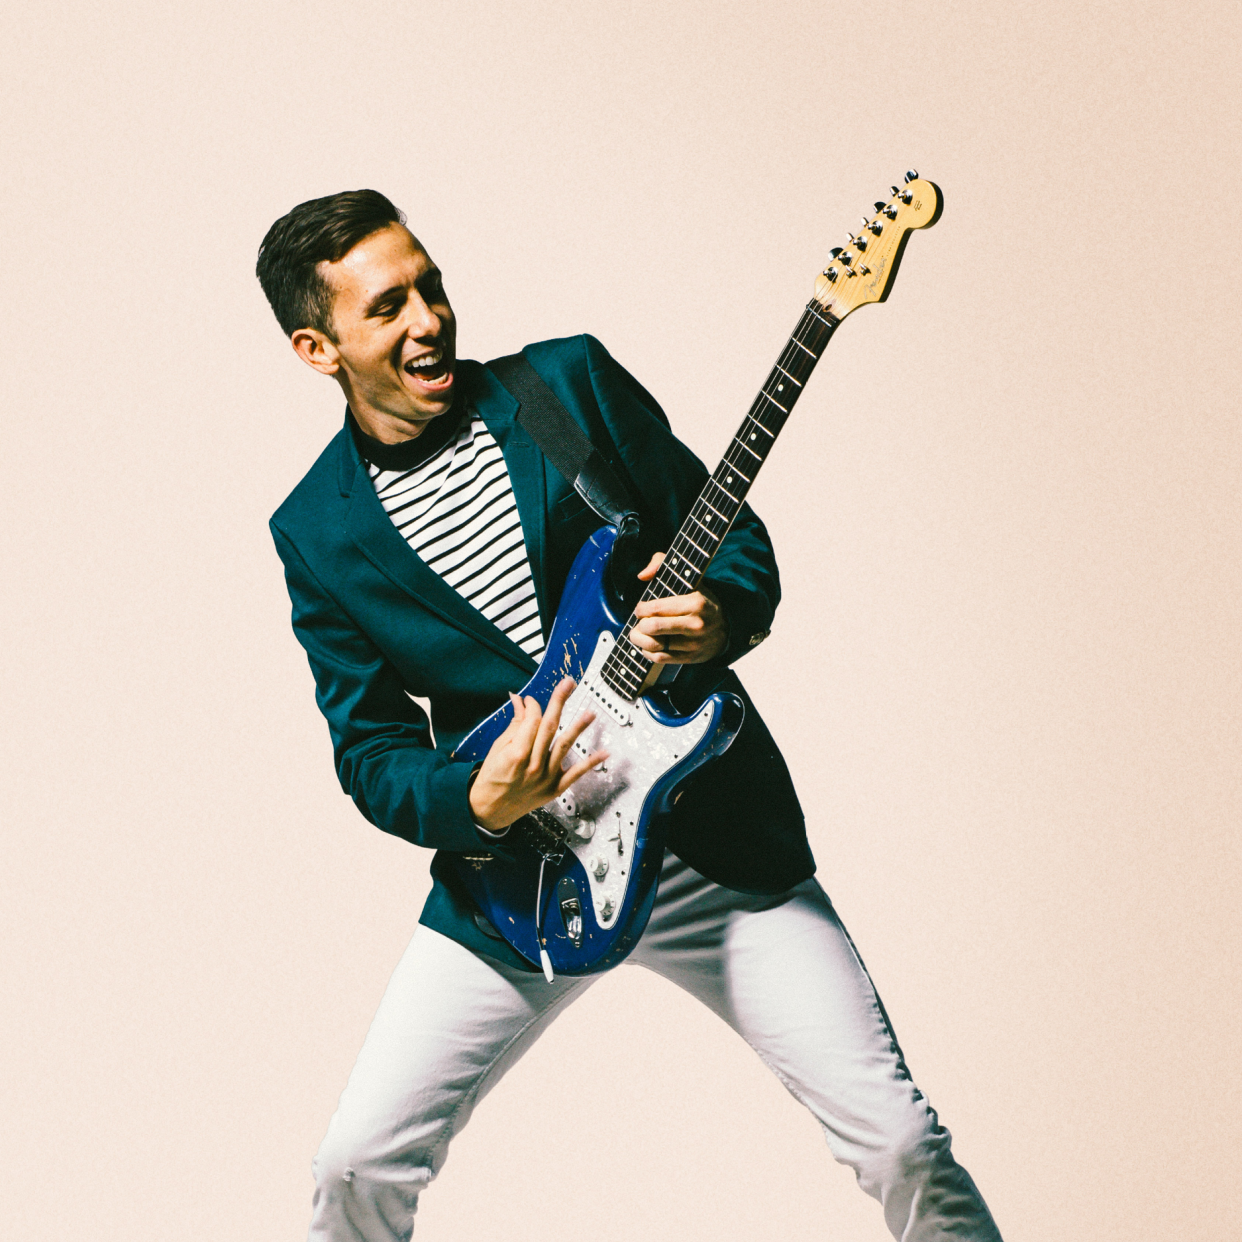 Cory Wong is a Grammy nominated guitarist, producer, composer, and a member of Vulfpeck and the Fearless Flyers.